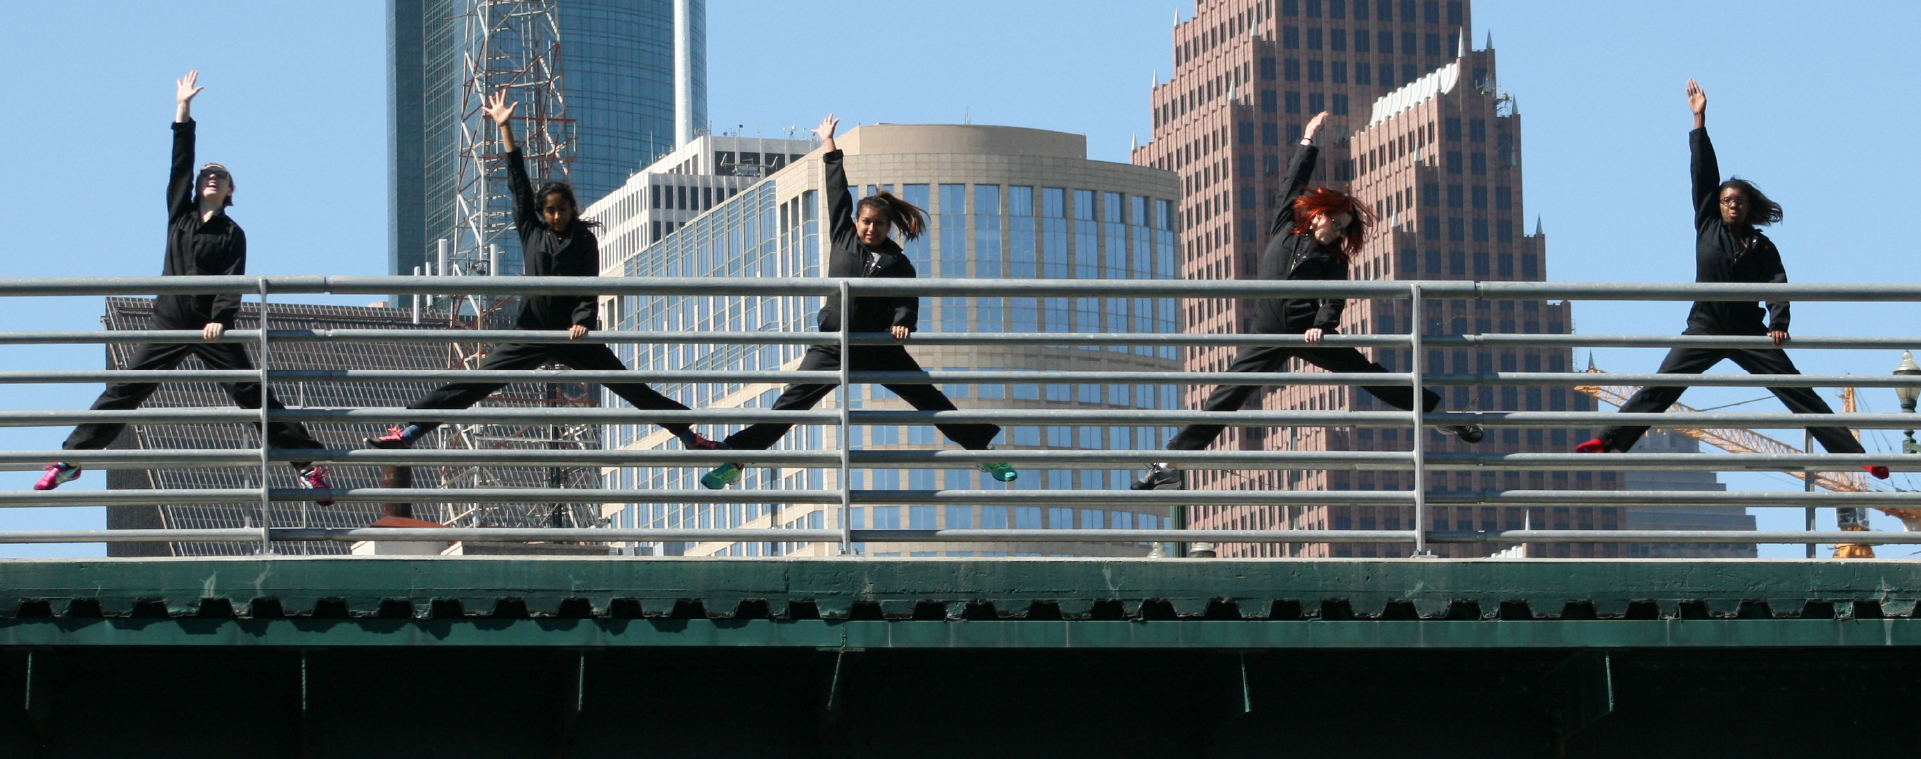 Performers in black coveralls simultaneously mid-split jump with one arm raised and the other holding railing atop a bridge in front of a downtown skyline.